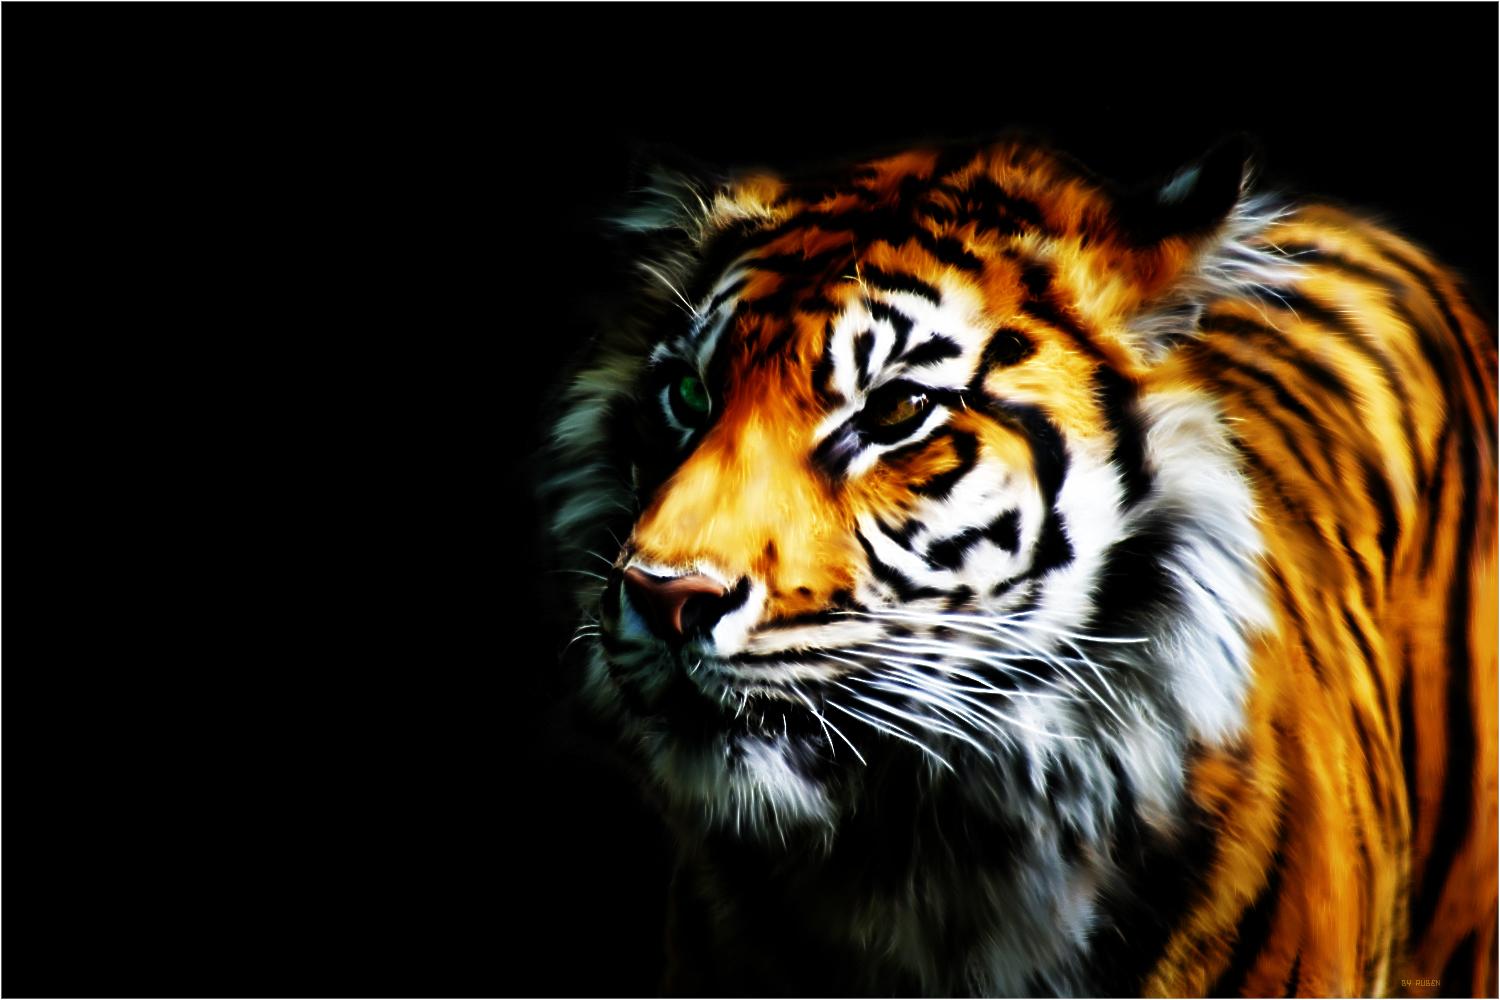 Real Tigers Wallpaper 3D Full HD 4K free. Top Model Hairstyle